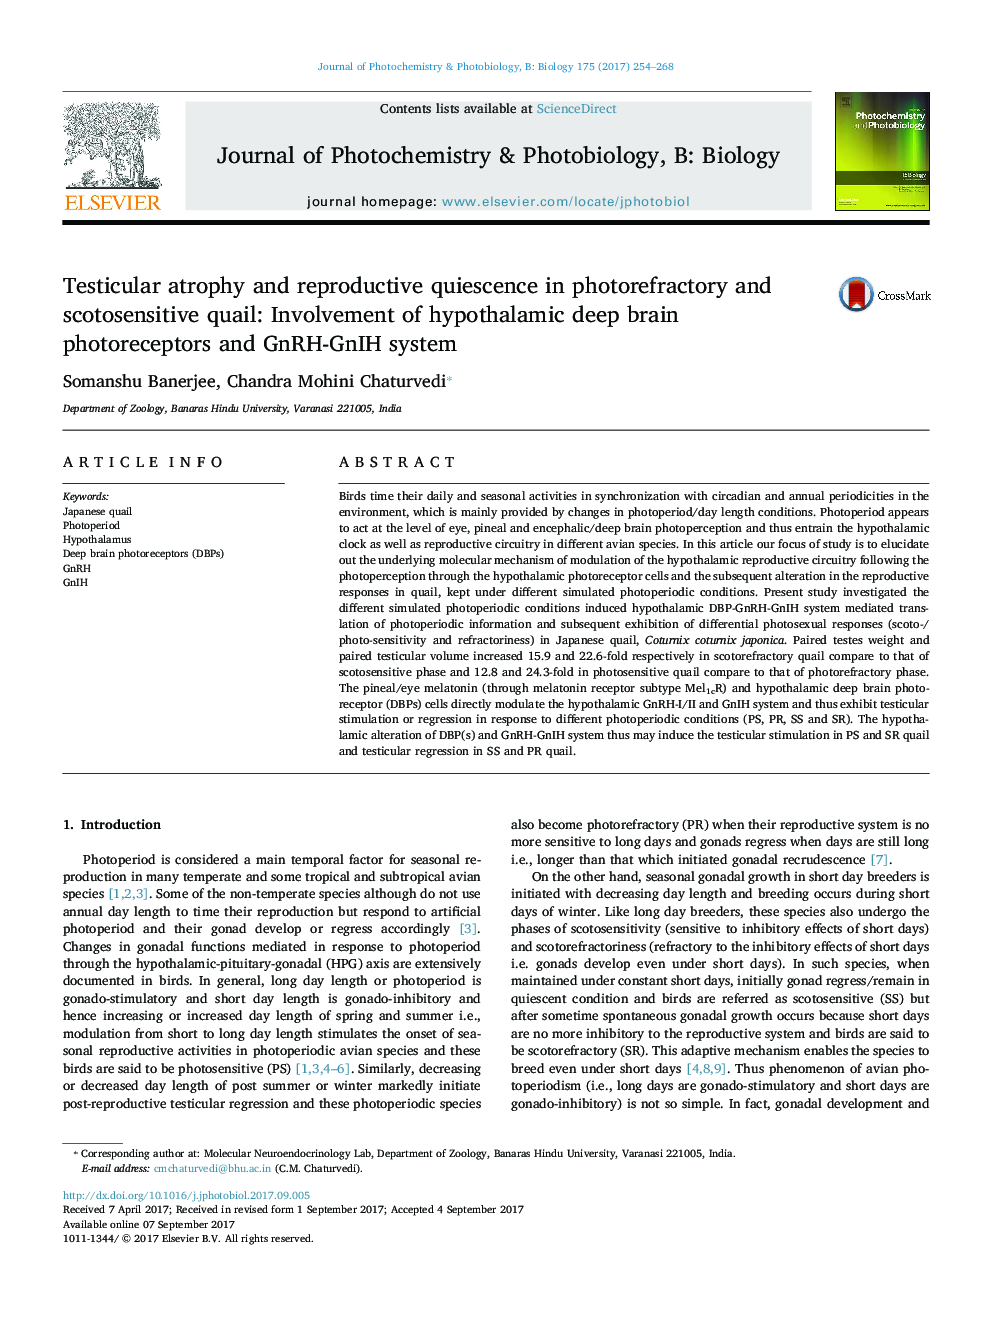 Testicular atrophy and reproductive quiescence in photorefractory and scotosensitive quail: Involvement of hypothalamic deep brain photoreceptors and GnRH-GnIH system